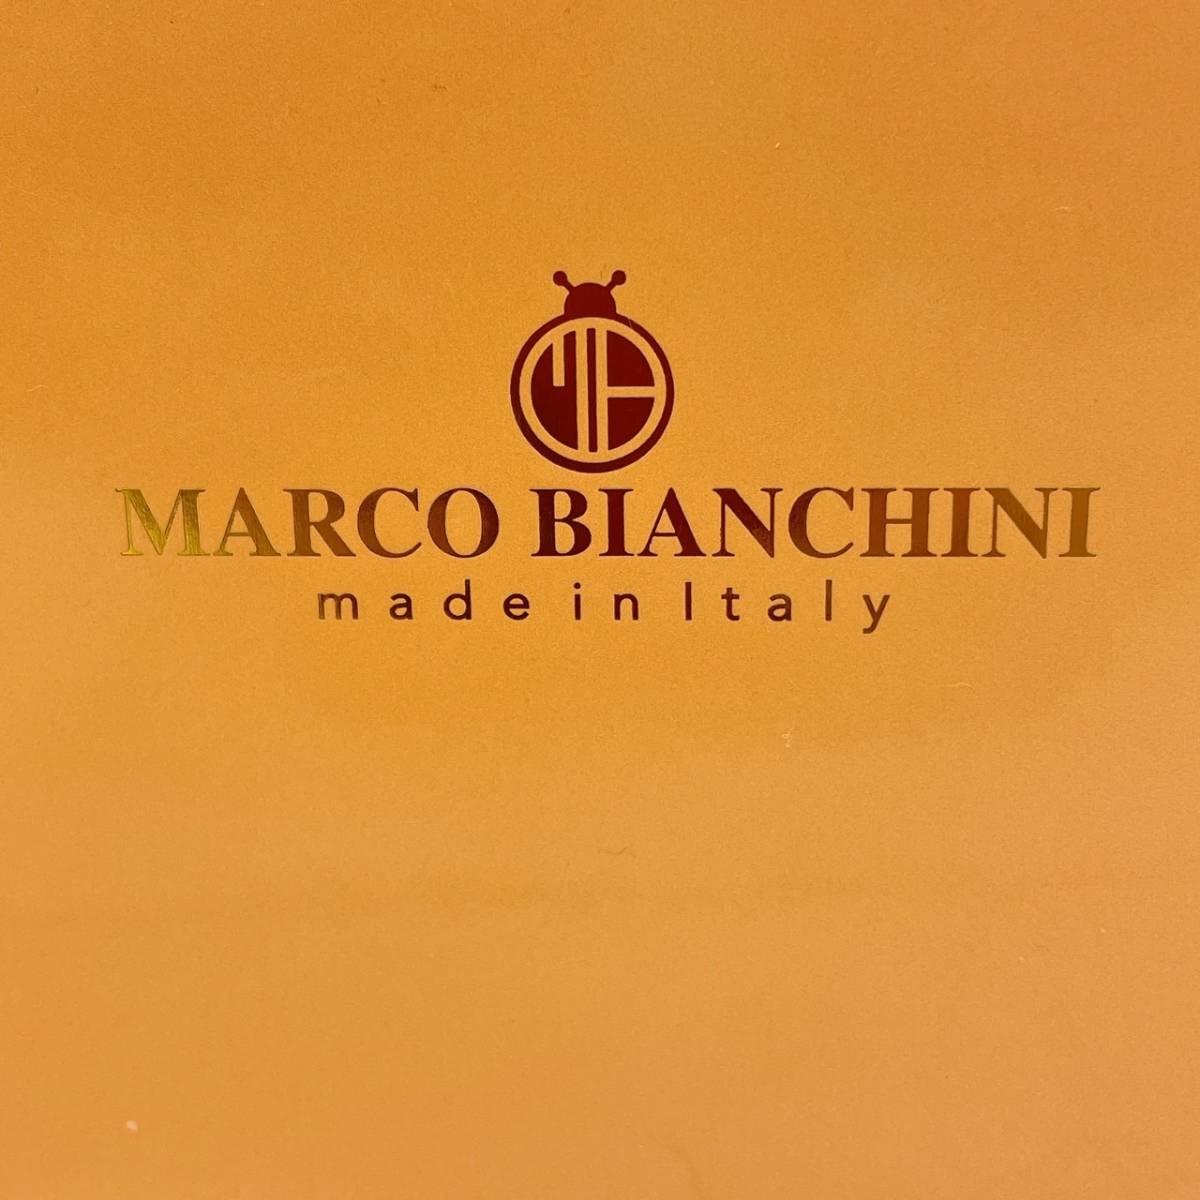 MARCO BIANCHINI REAL LEATHER ポーチ 赤 ゴールド 箱付き レザー イタリア製 【7562_画像9